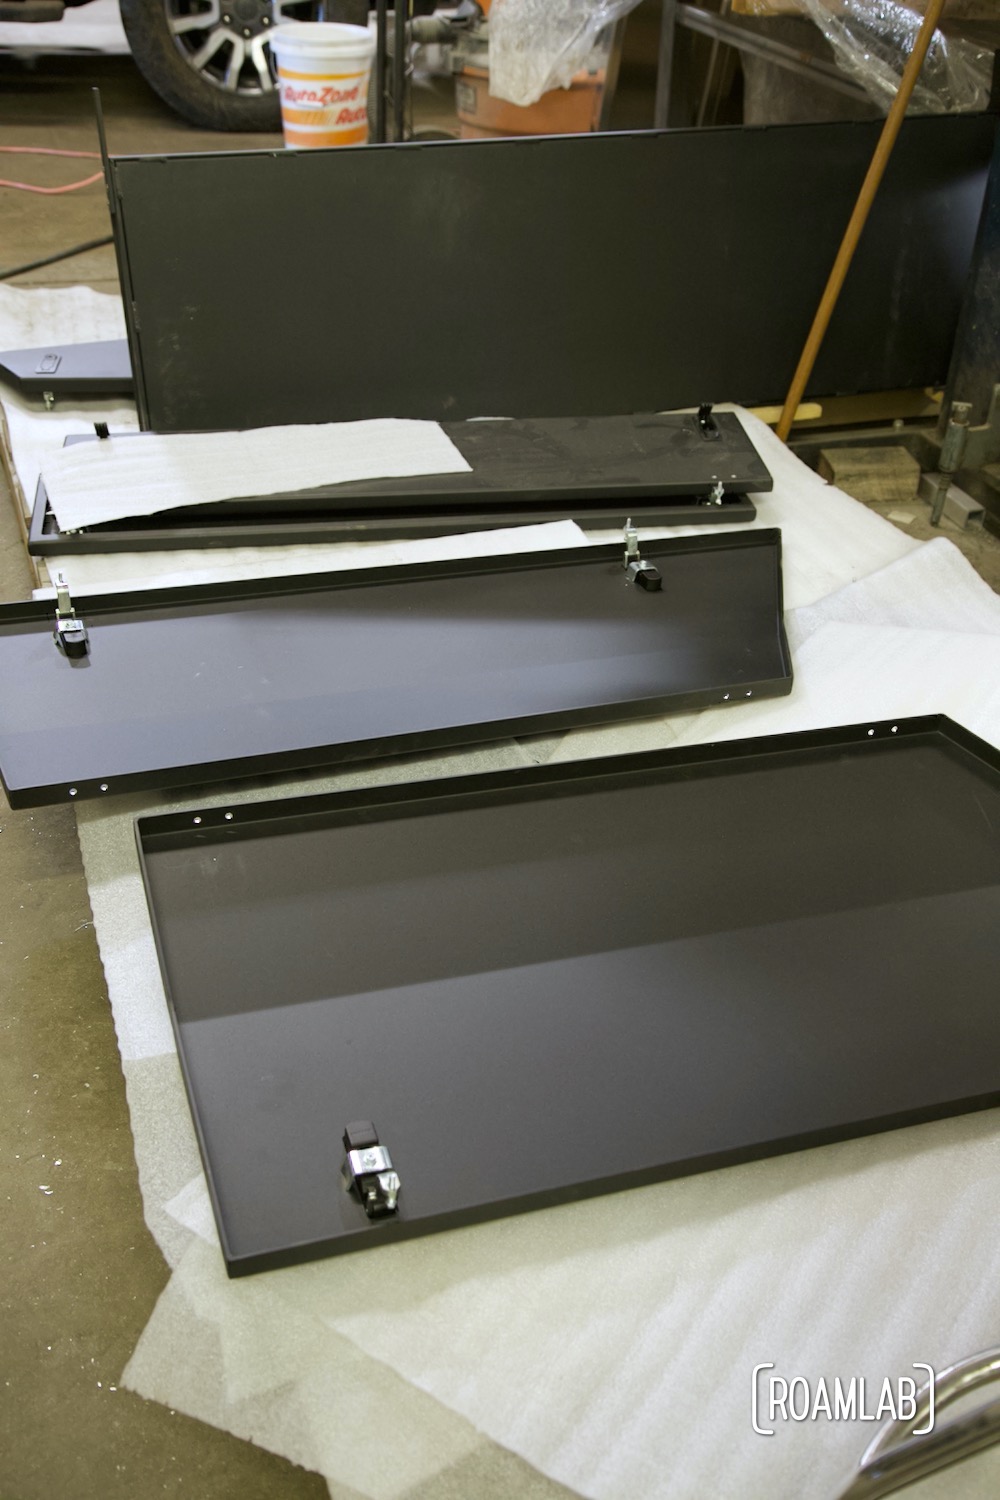 Storage box hatches ready to be installed on a Bowen Customs aluminum truck bed.